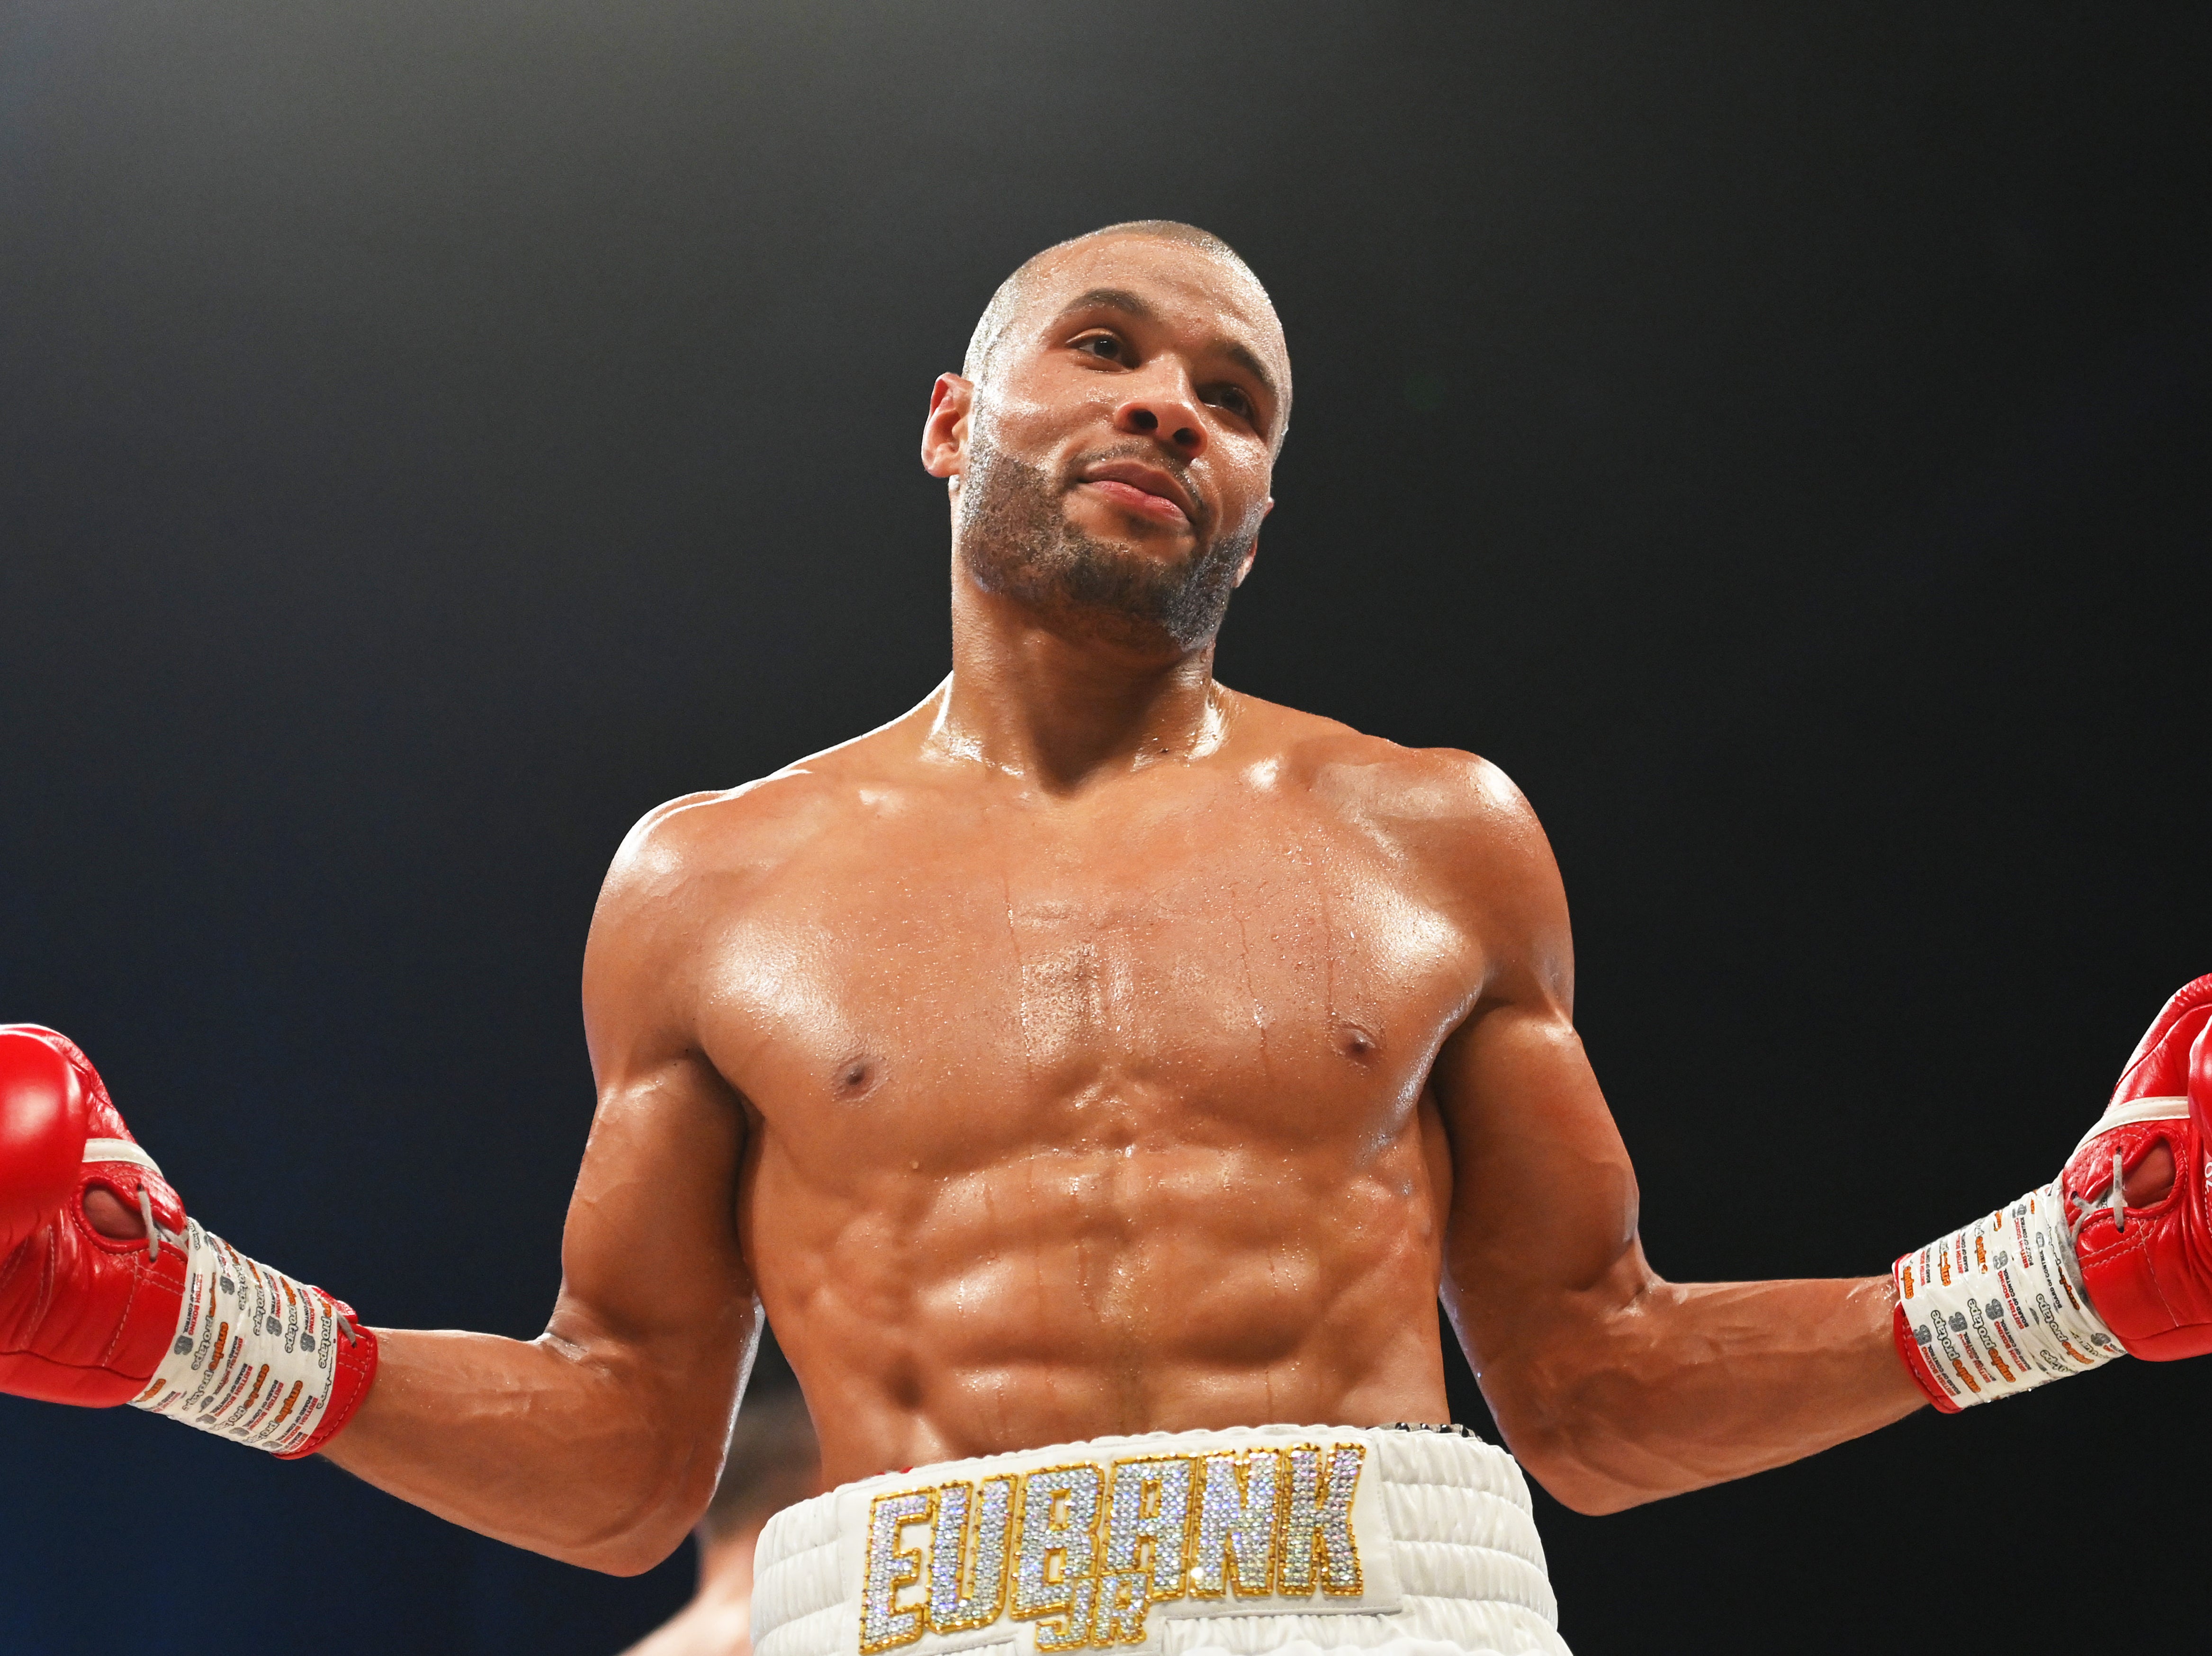 The 32-year-old has spent the past two years training under Roy Jones Jr